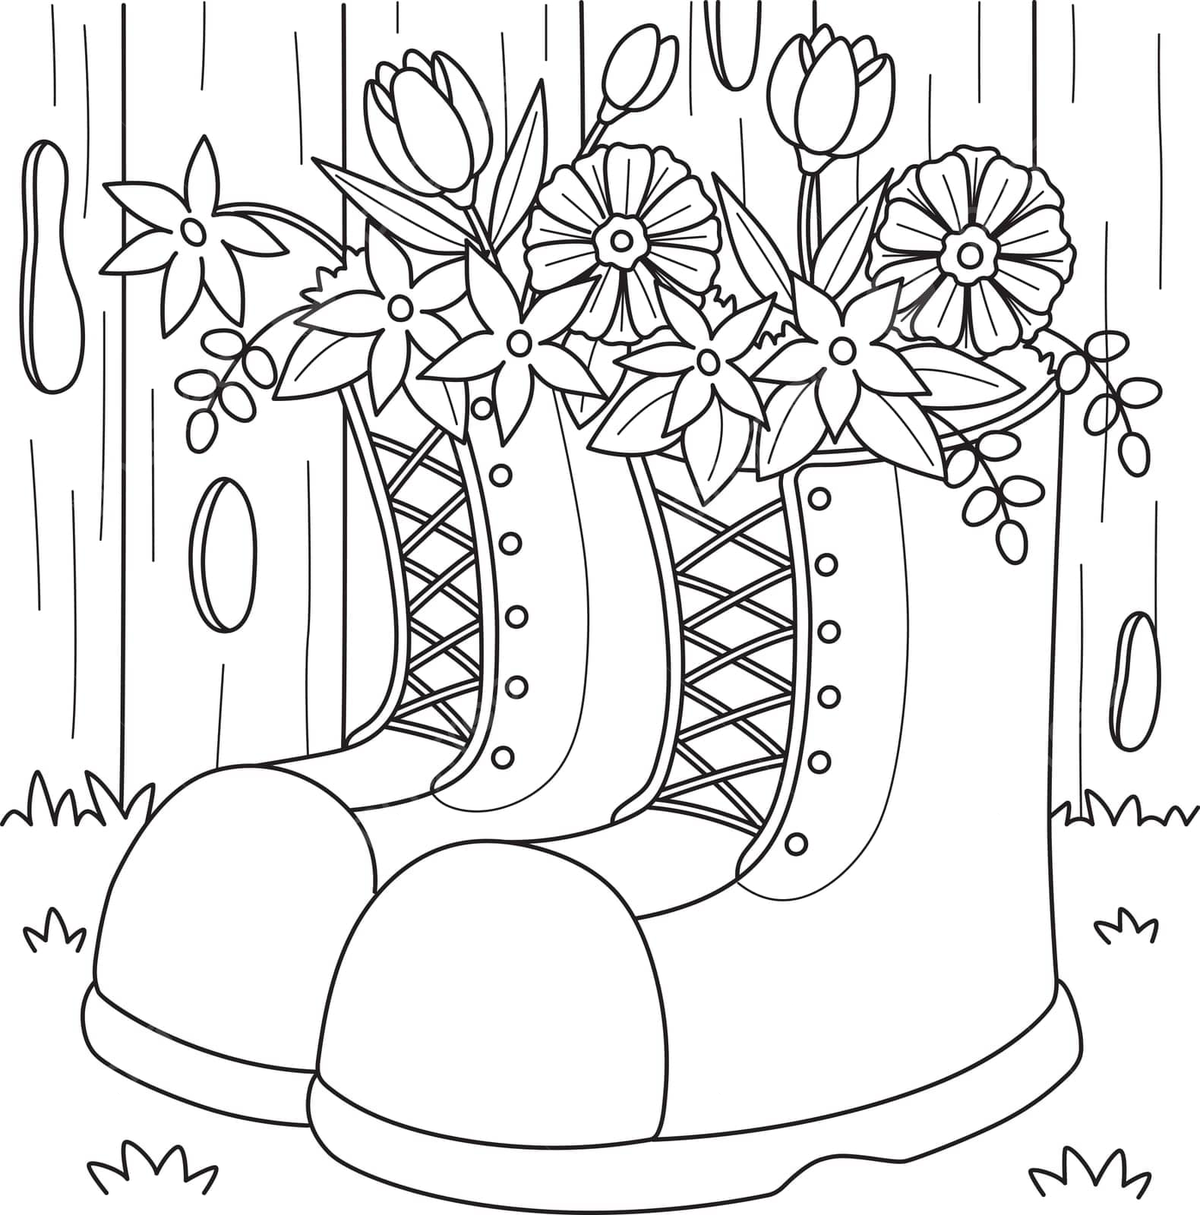 Spring boots with floral design coloring sheet for children vector coloring book colouring book page png and vector with transparent background for free download